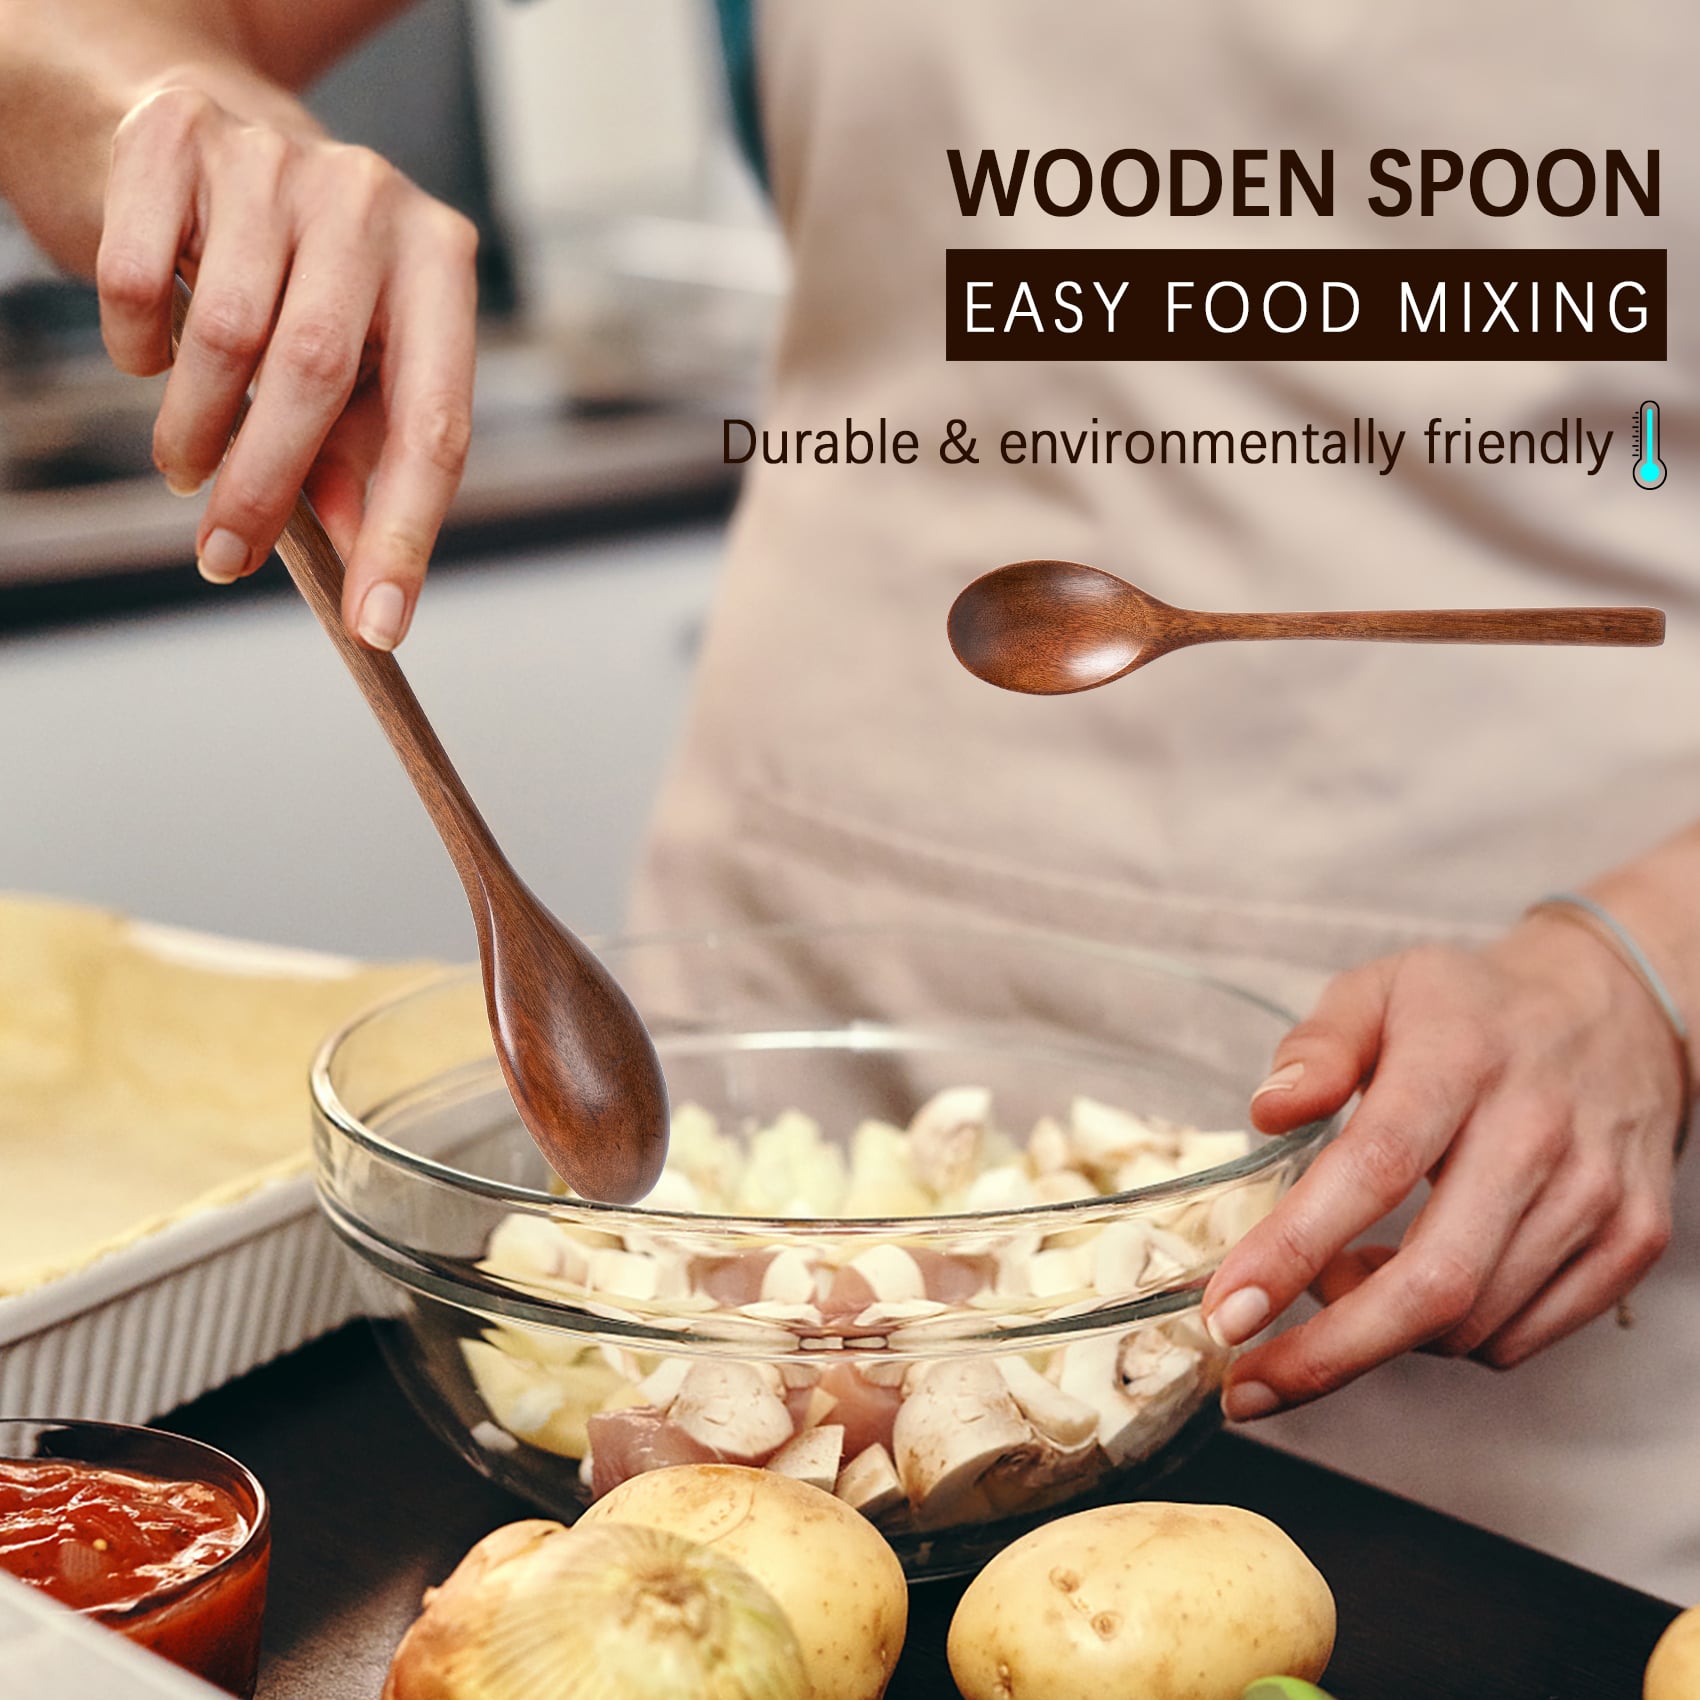 A man is mixing food in a bowl with this all-natural wooden and eco-friendly long-handled mixing spoon